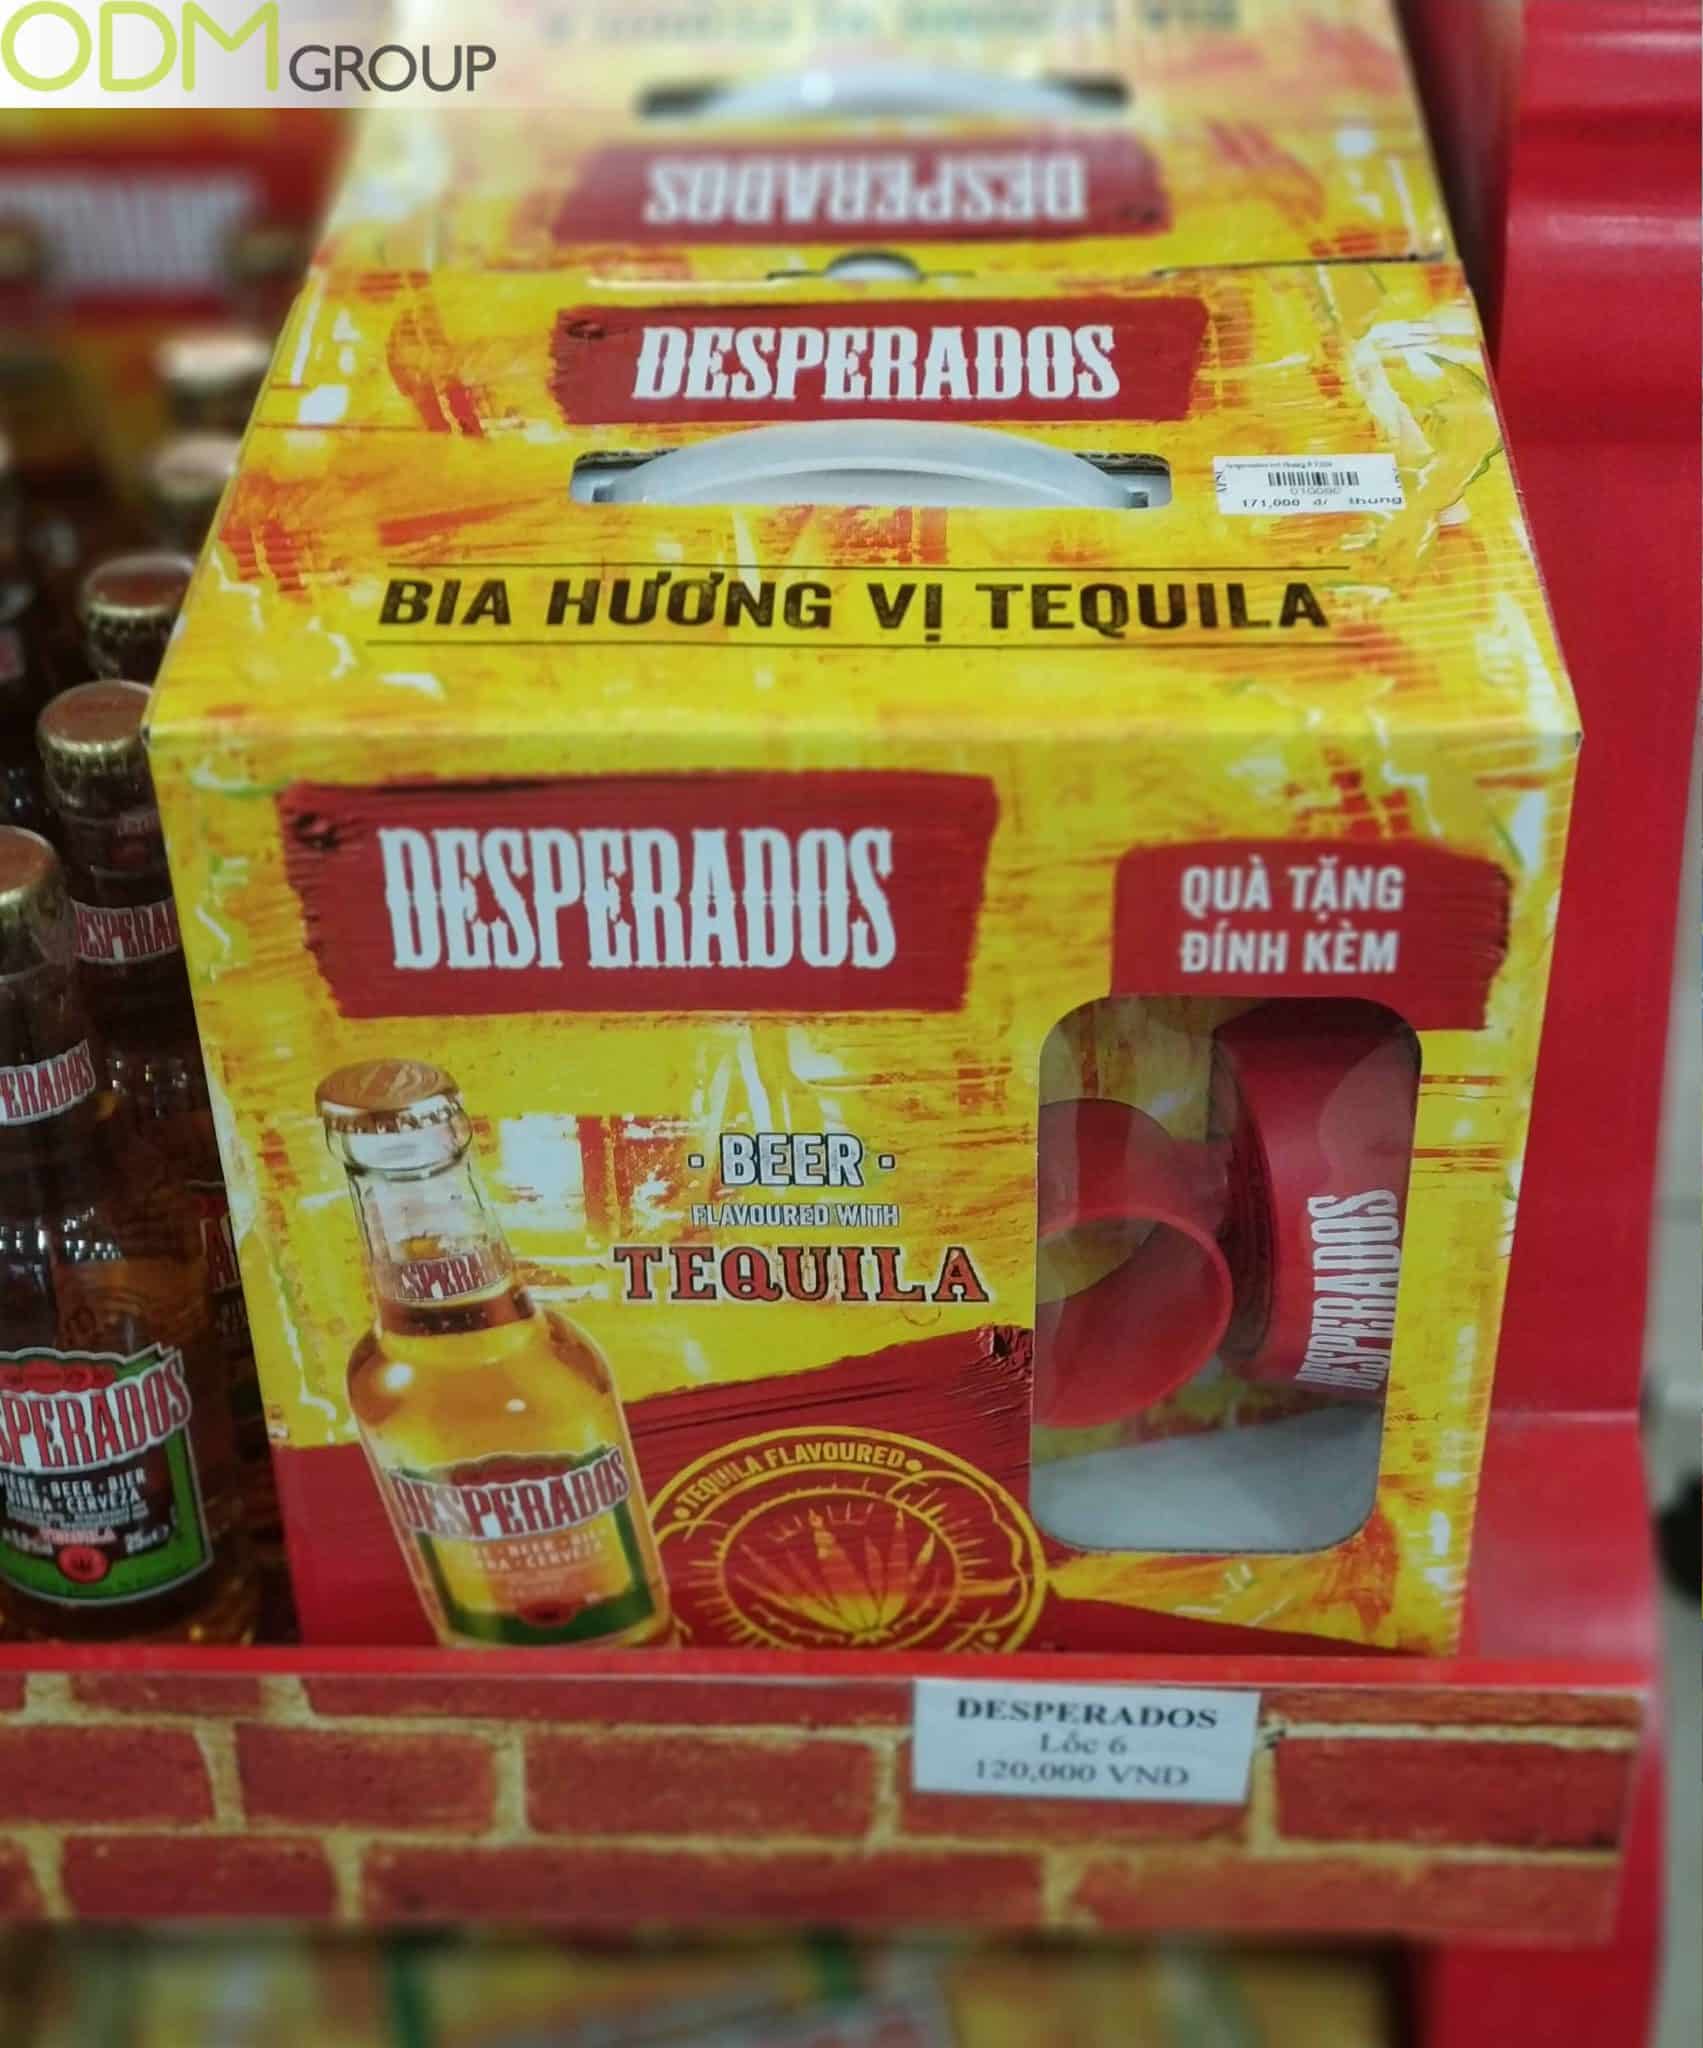 Cool Promotional Drinks Products Desperados Spin the Bottle Giveaways